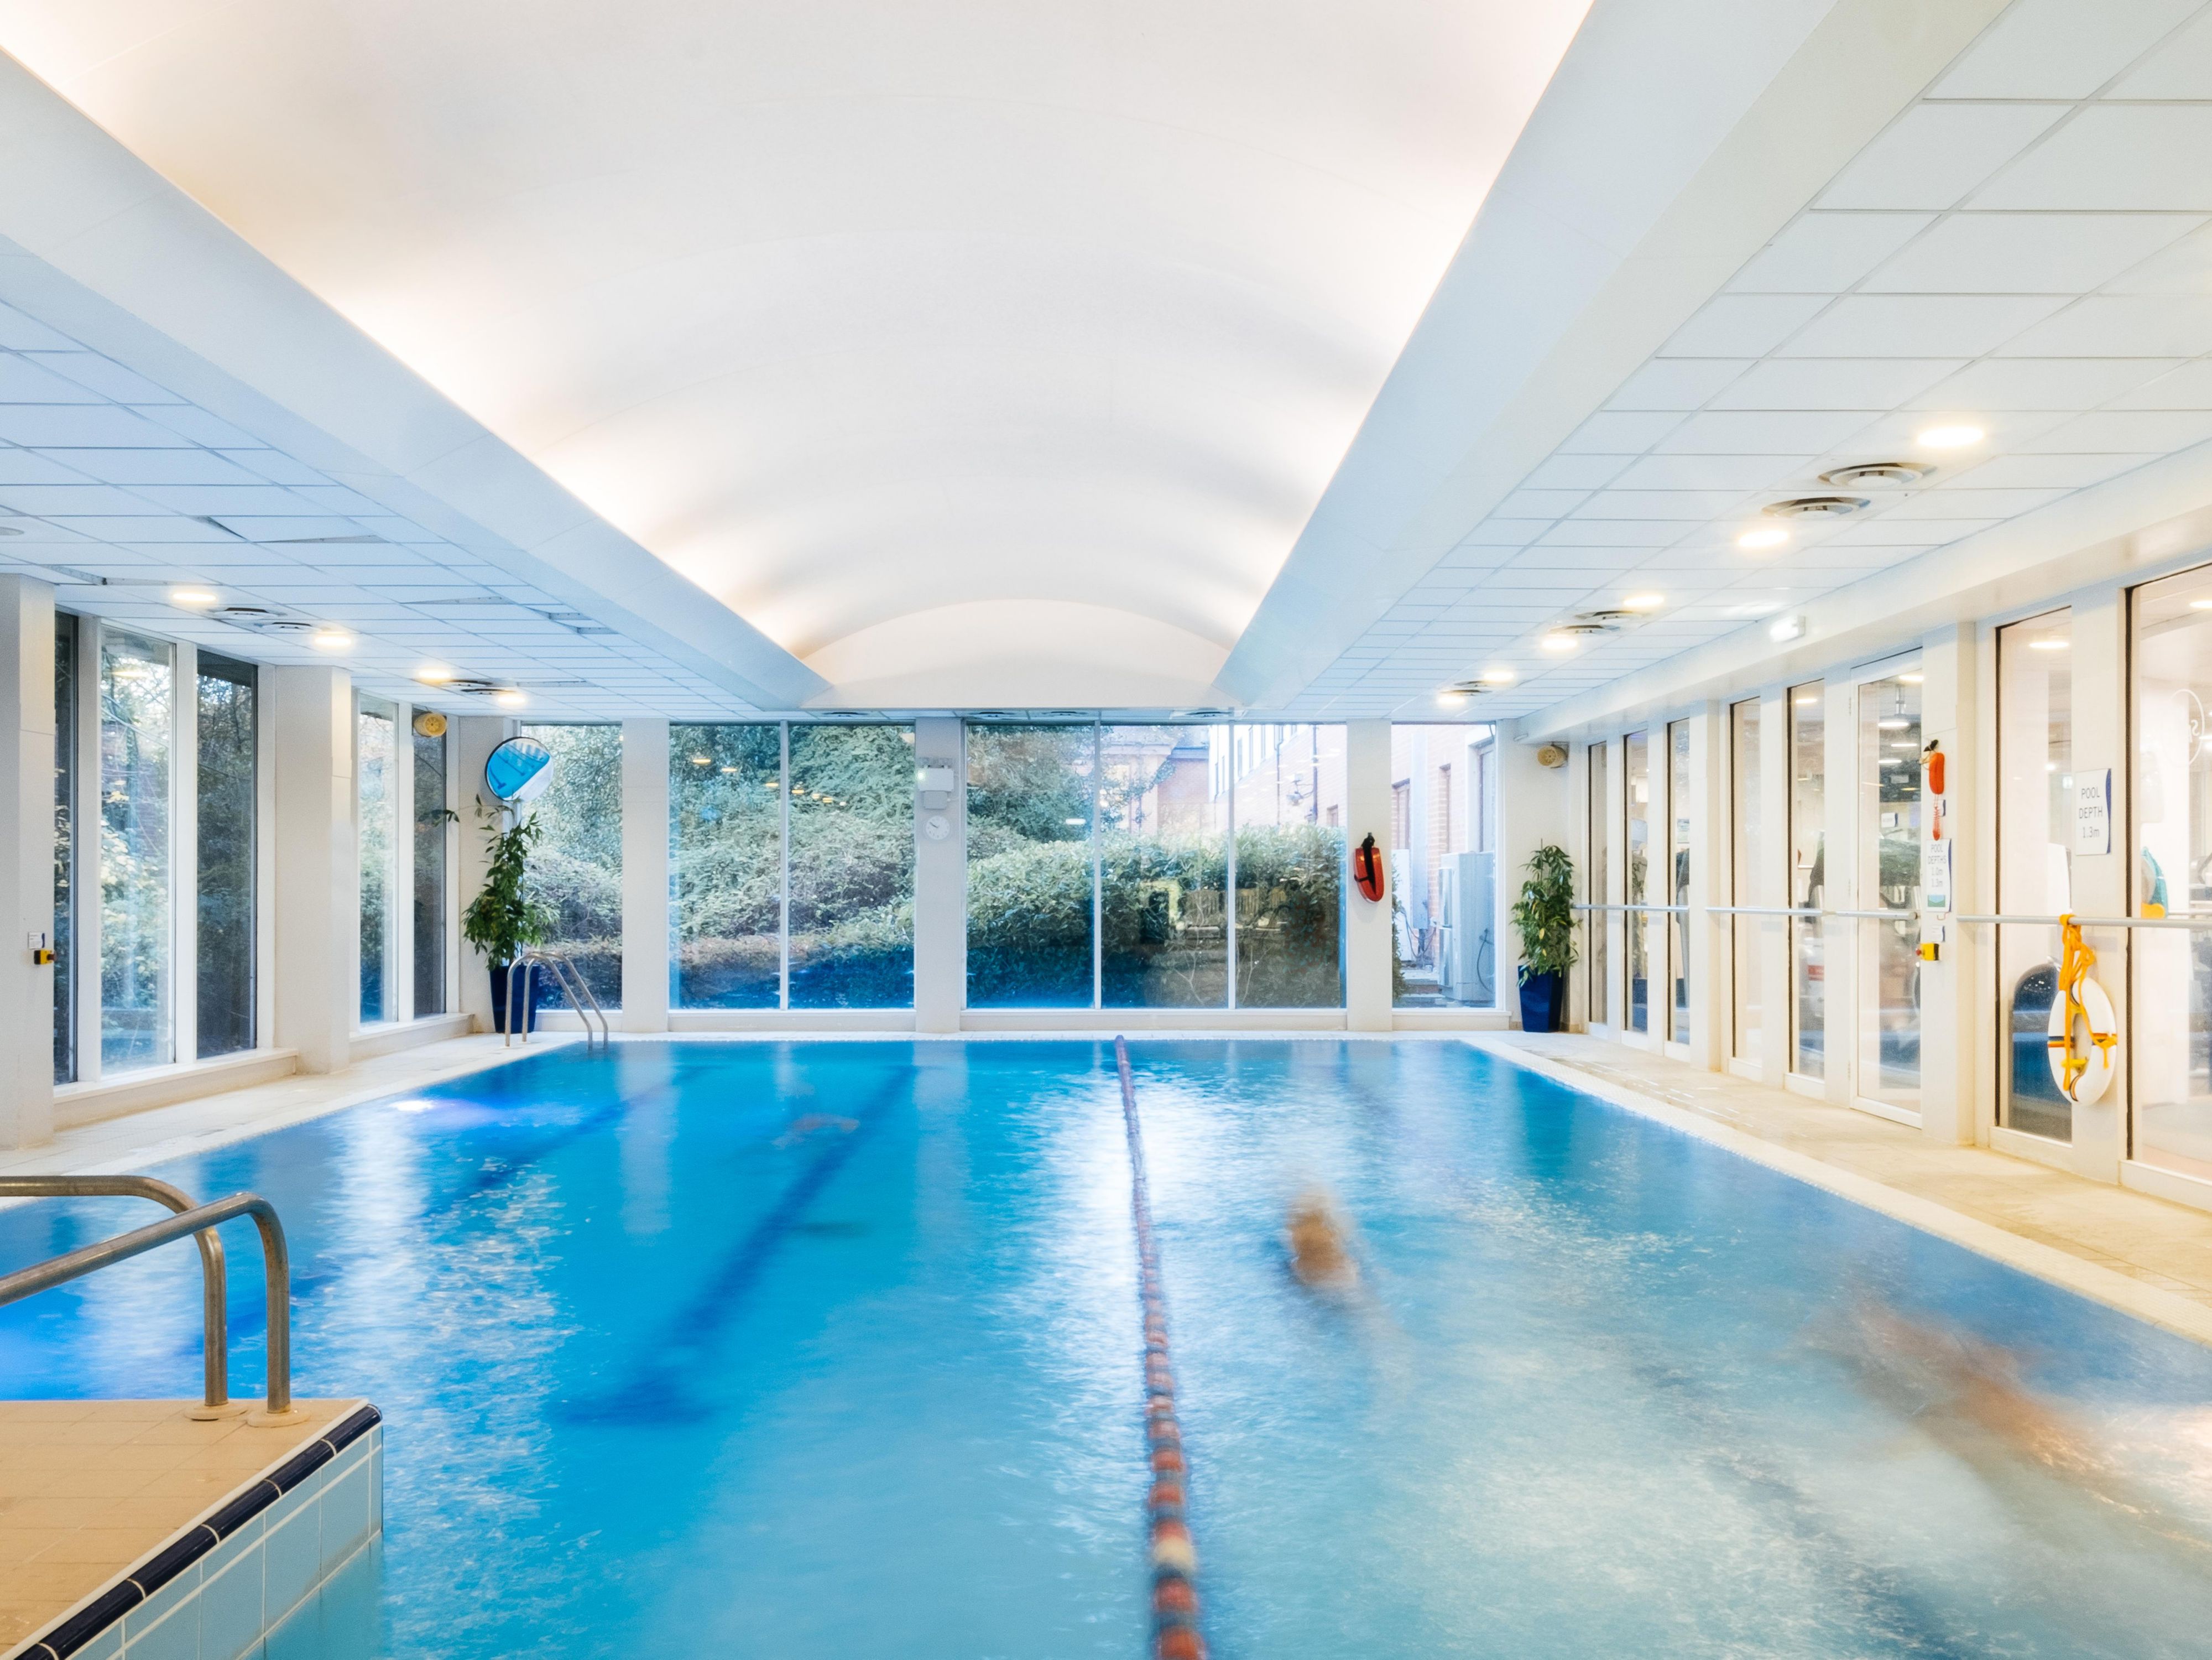 The Spirit Health Club has a fully equipped aerobic and weight gym, with a swimming pool, jacuzzi, steam room and sauna.